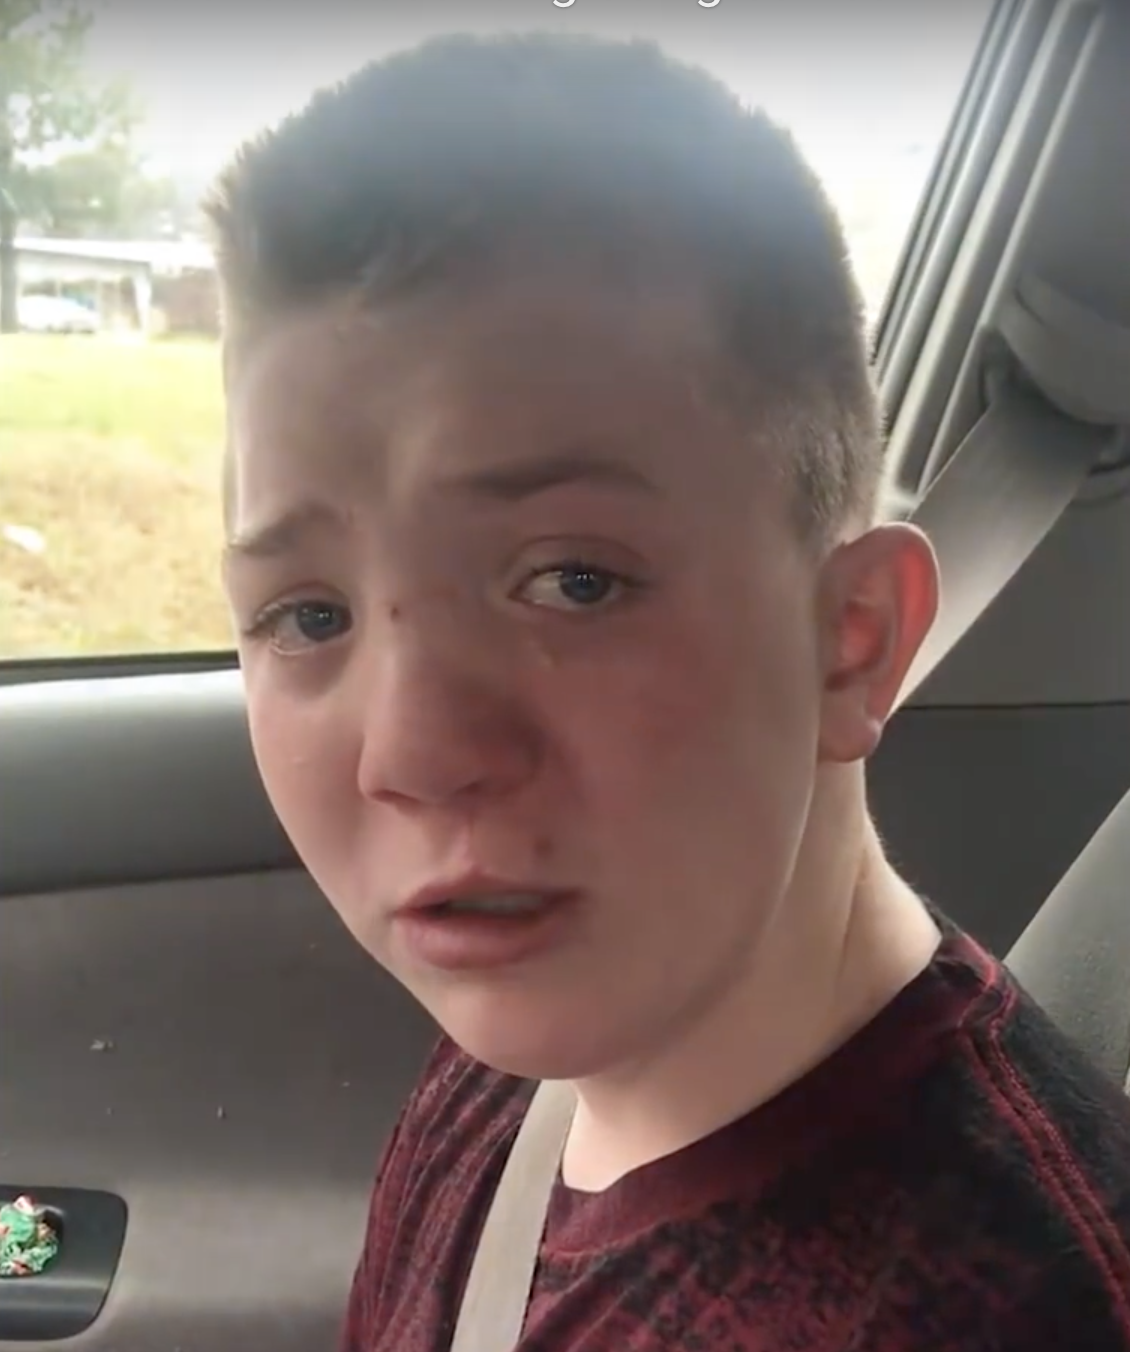 This is why people are enraged over the video of bullying victim Keaton Jones